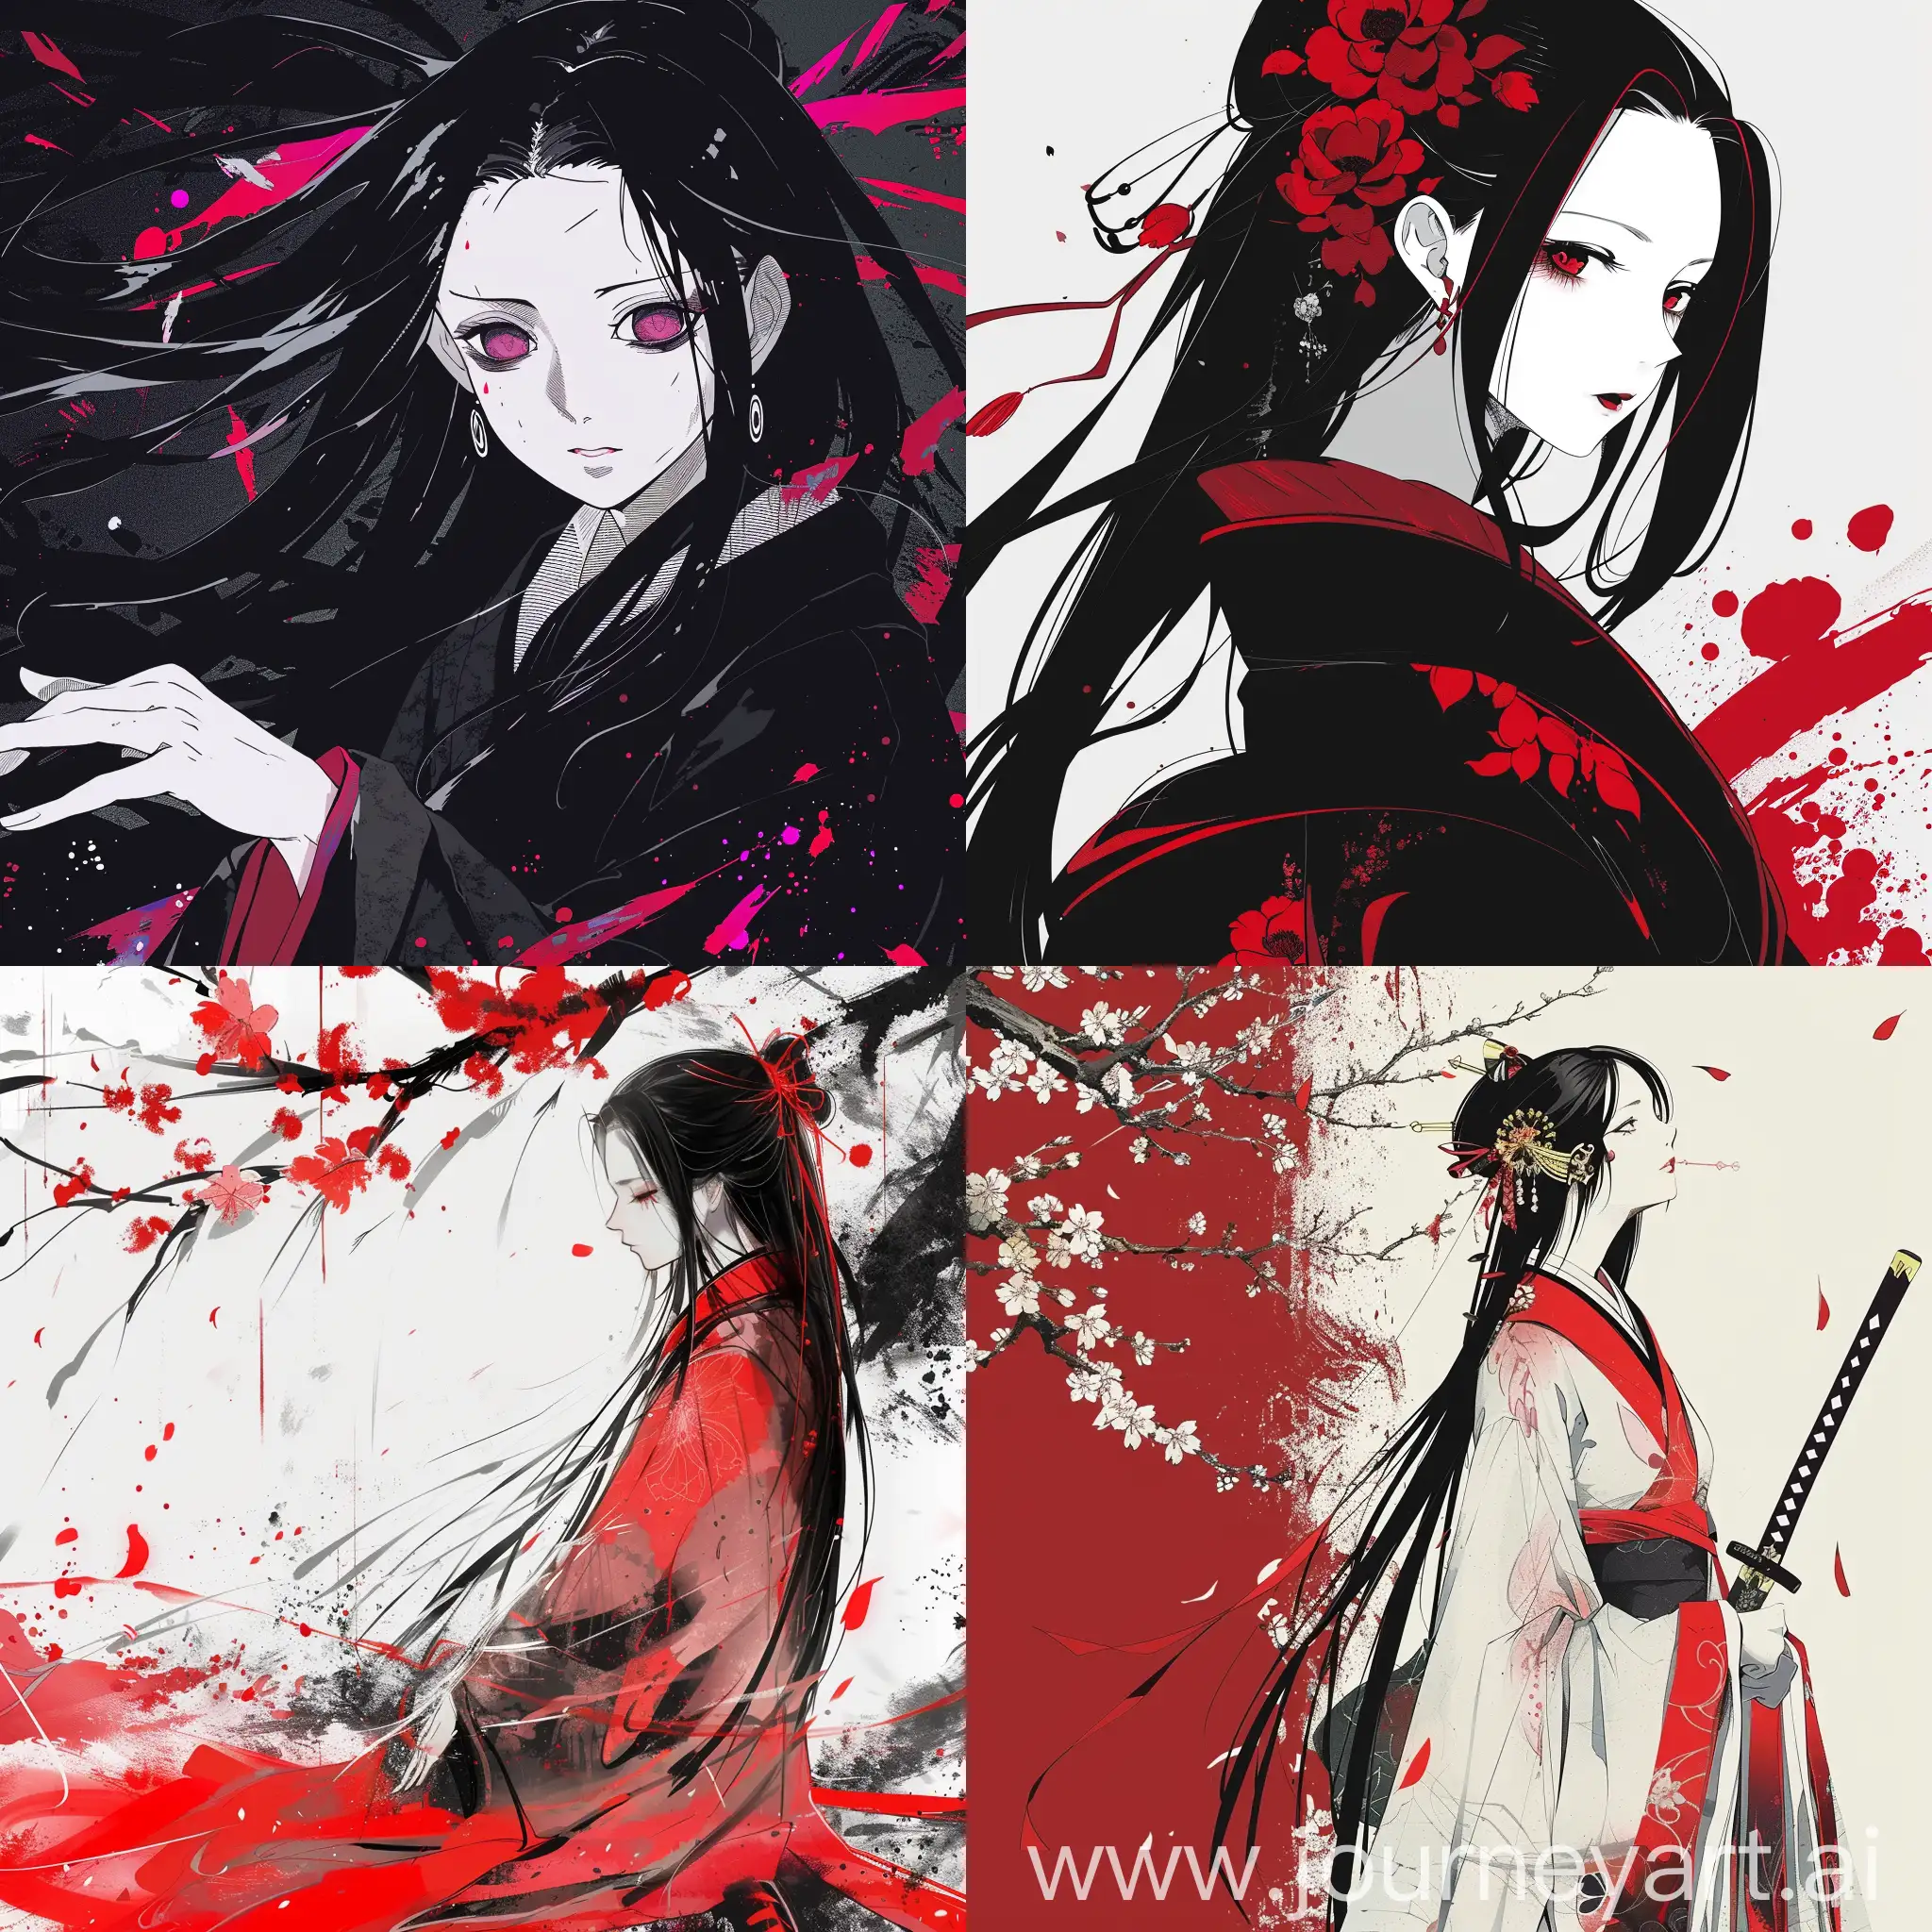 Kaguya-Anime-Wallpaper-with-Vibrant-Colors-and-Artistic-Rendering